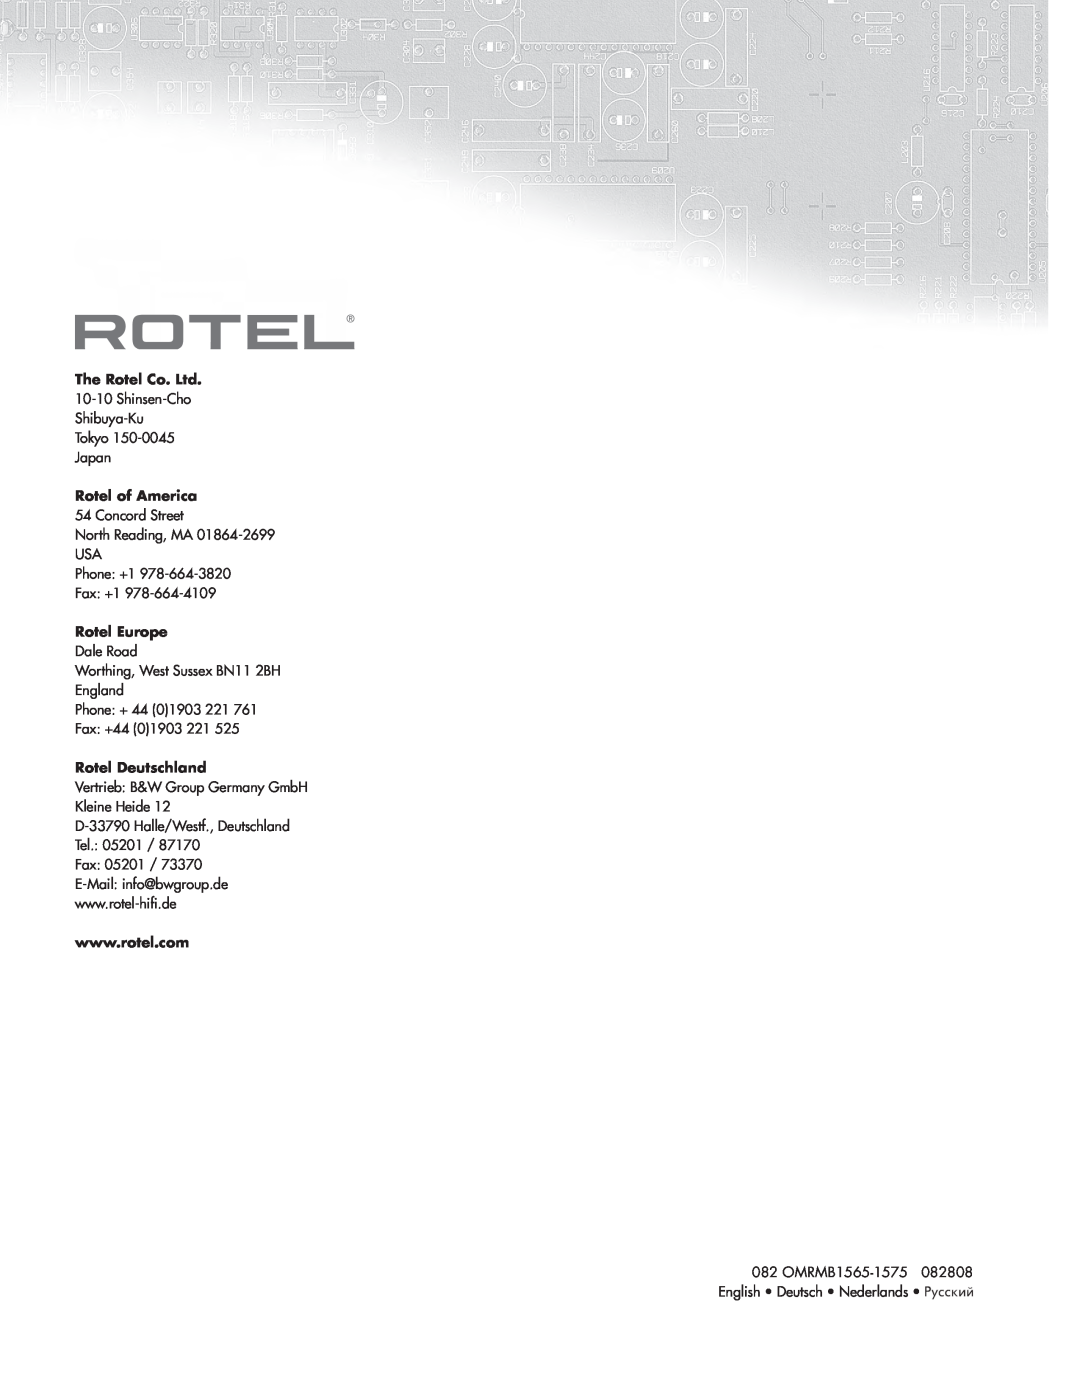 Rotel RMB1575BK, RMB-1565 manual Rotel of America, Rotel Europe, Rotel Deutschland 